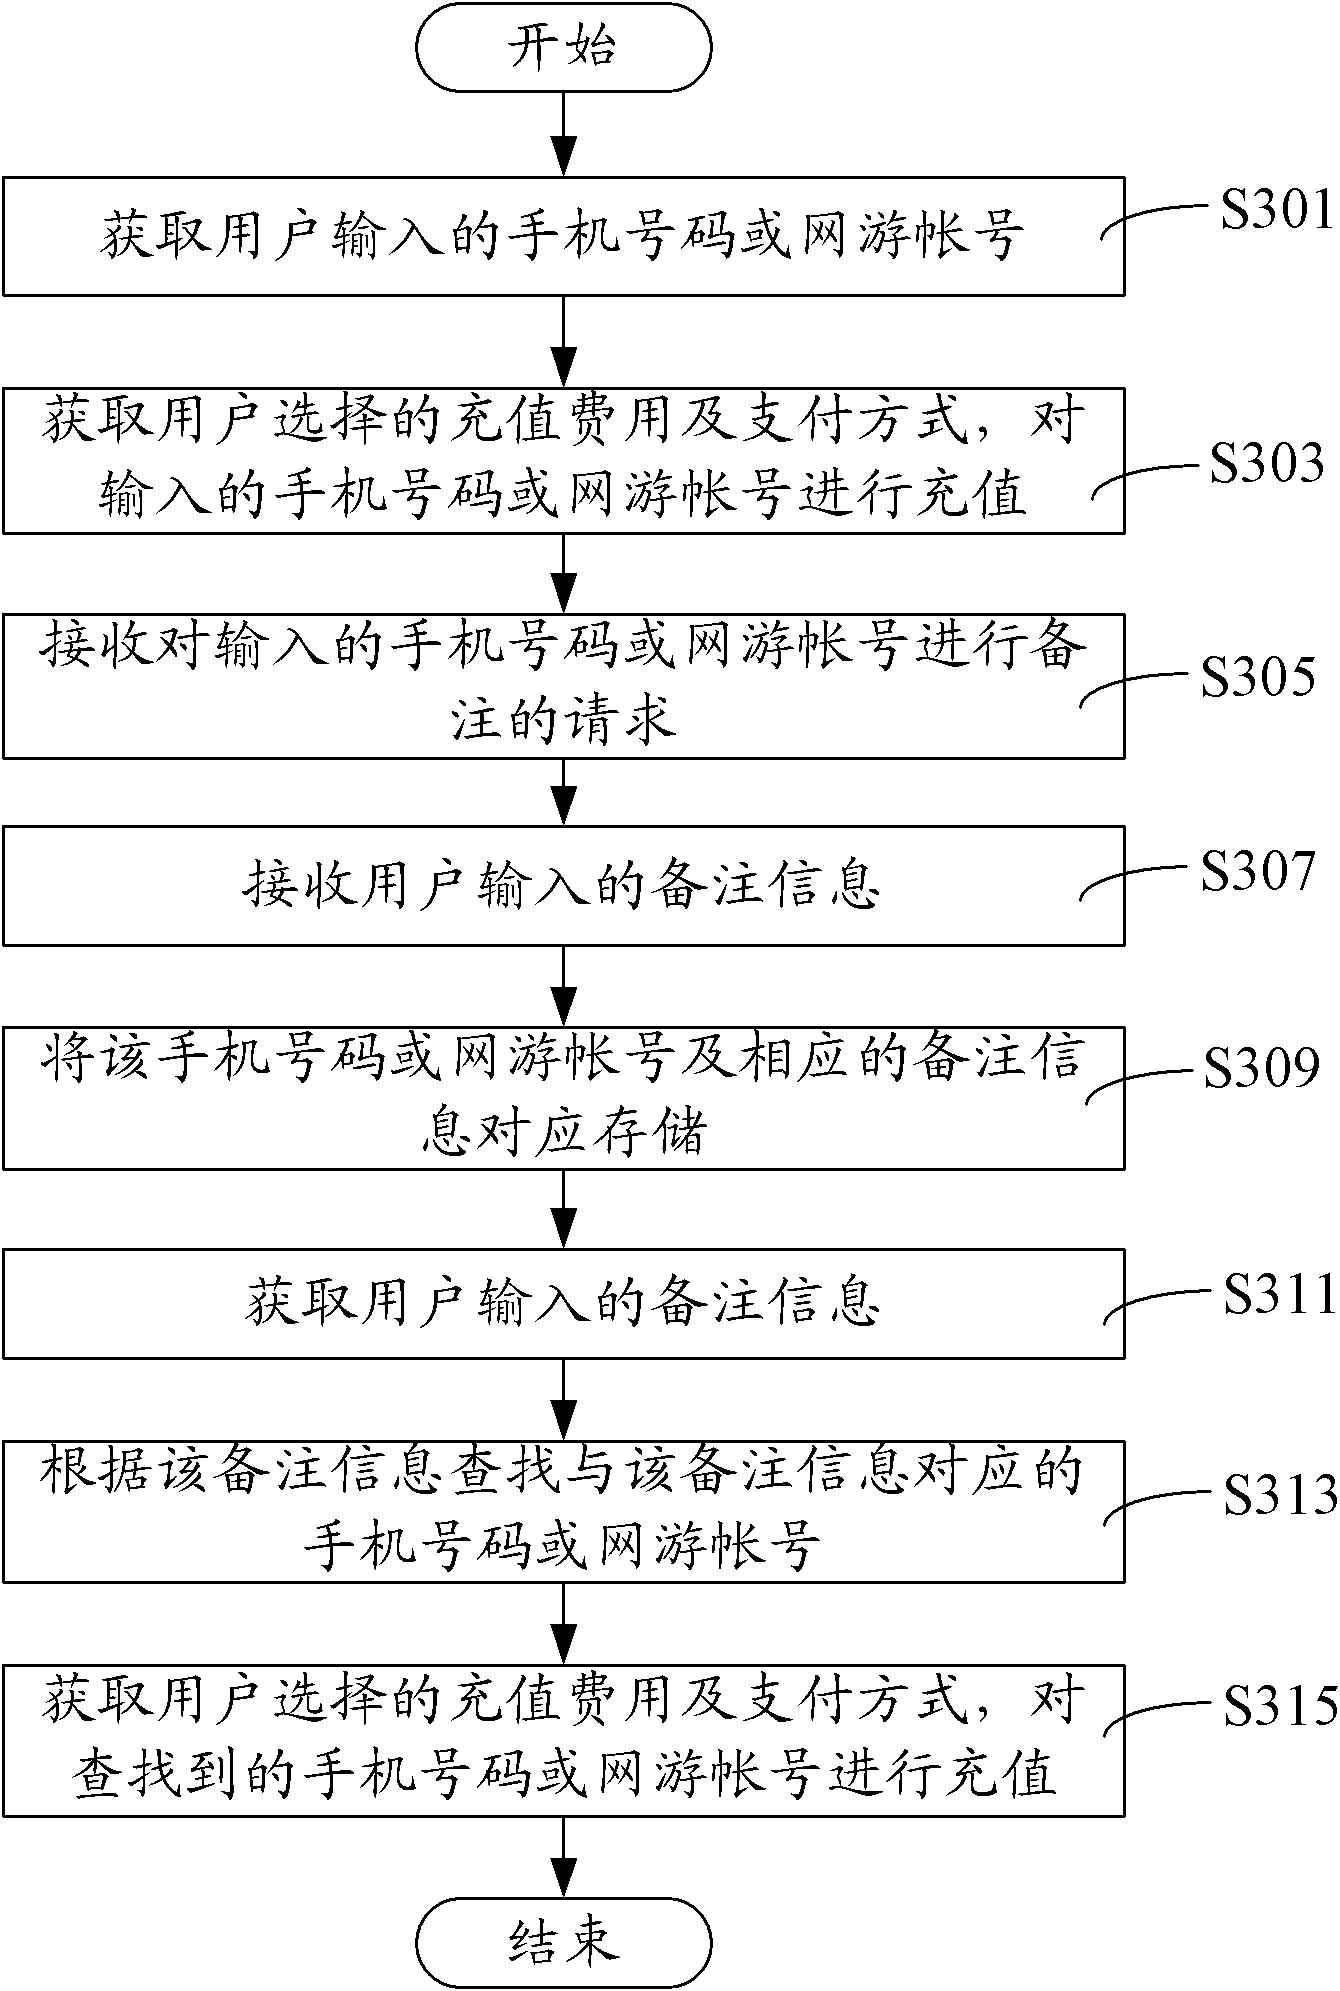 Method and system for virtual goods order comments